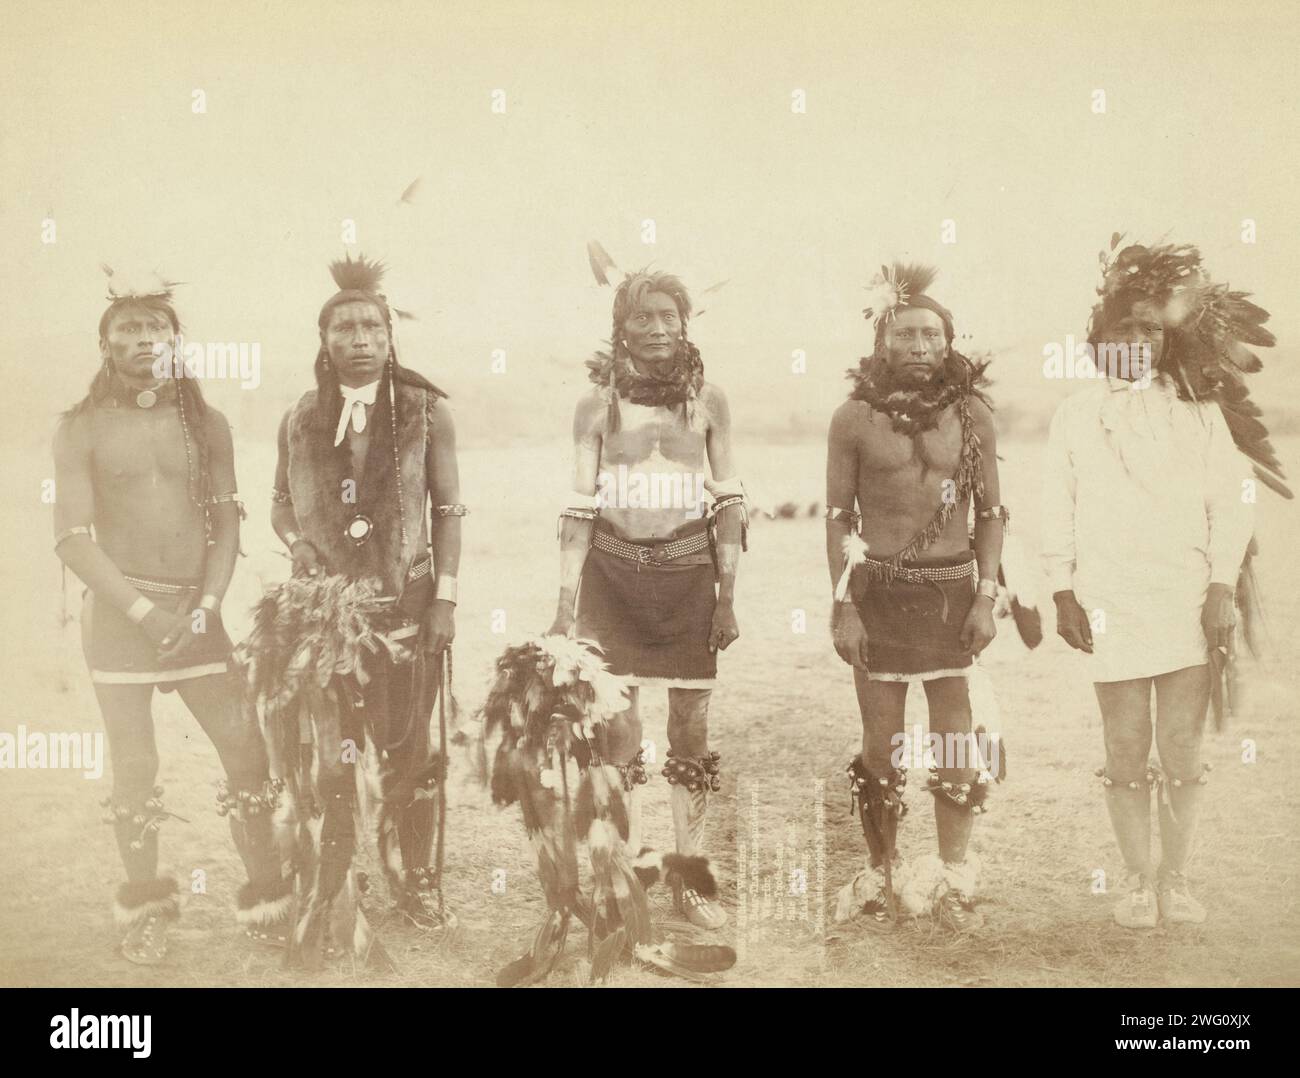 Indian Warriors. Mr. Bear-that-Runs-and-Growls, Mr. Warrior, Mr. One-Tooth-Gone, Mr. Sole (bottom of foot), Mr. Make-it-Long []. Five Grass dancers in ceremonial clothing, probably part of Big Foot's (Miniconjou) band at a Grass Dance on the Cheyenne River, S.D. on or near Cheyenne River Reservation. Stock Photo